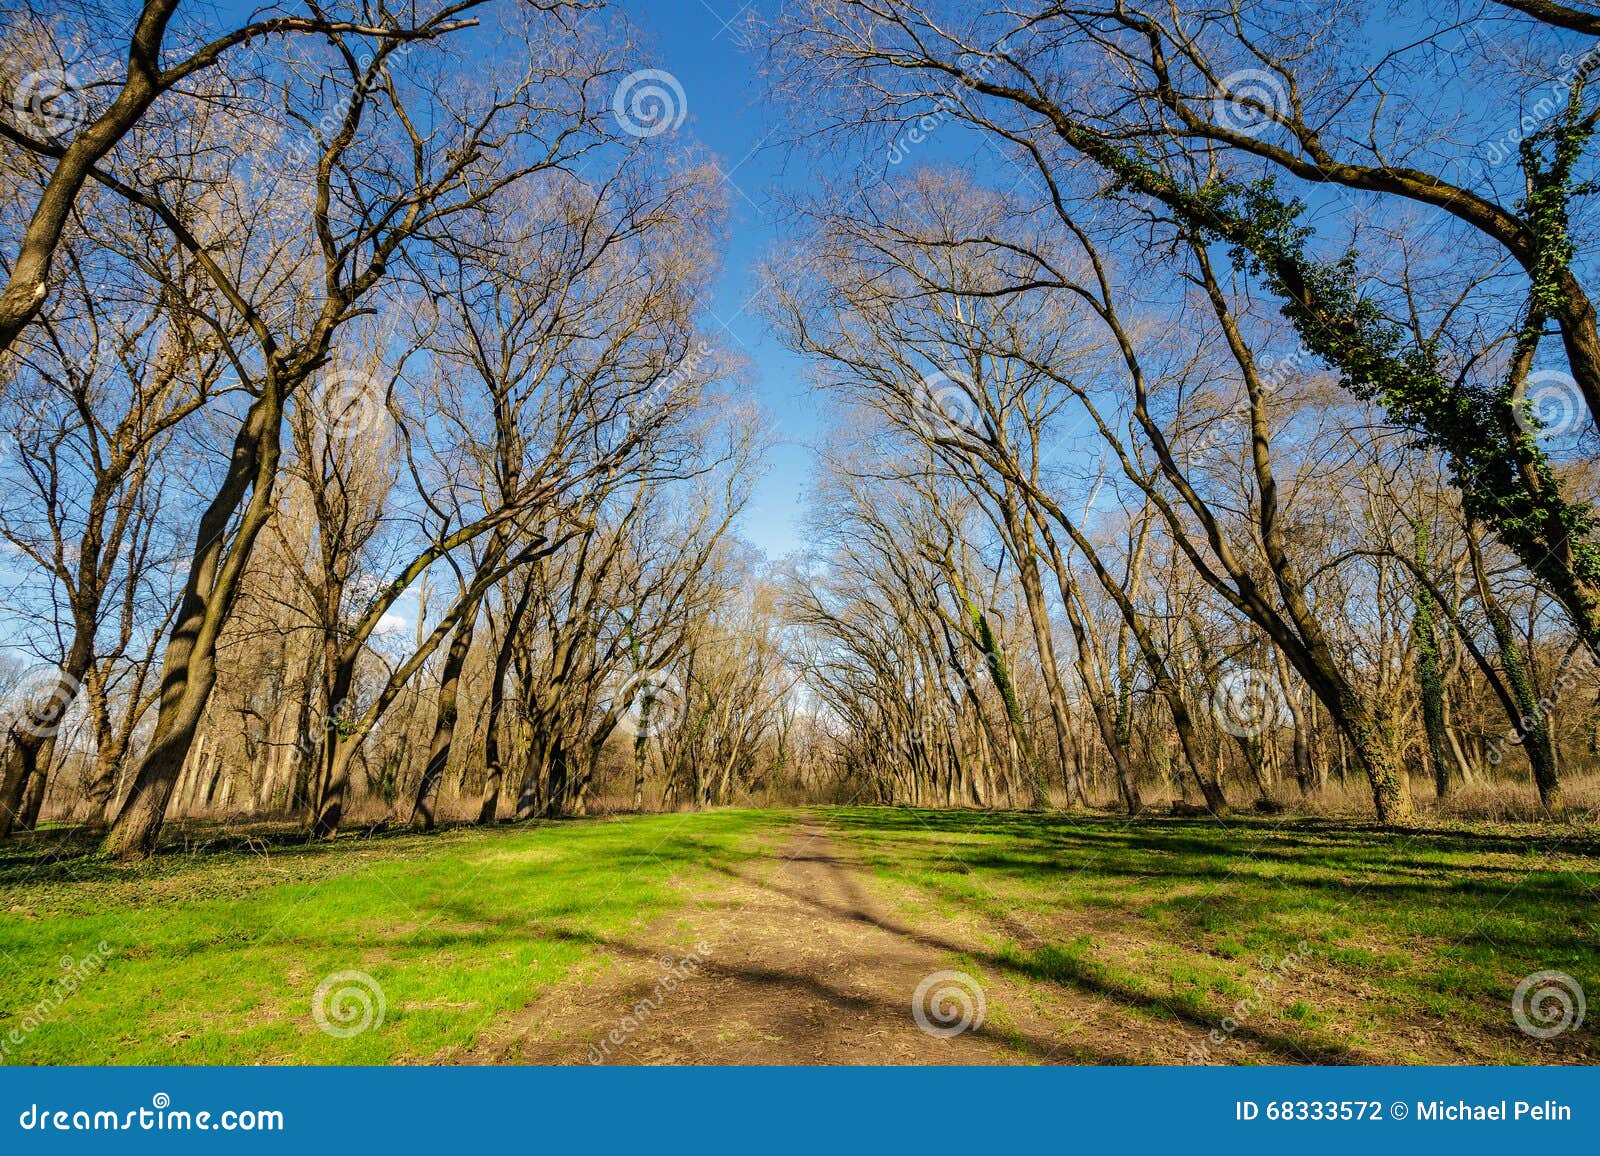 Path in To Deep Ancient Forest Stock Photo - Image of lawn, spring ...